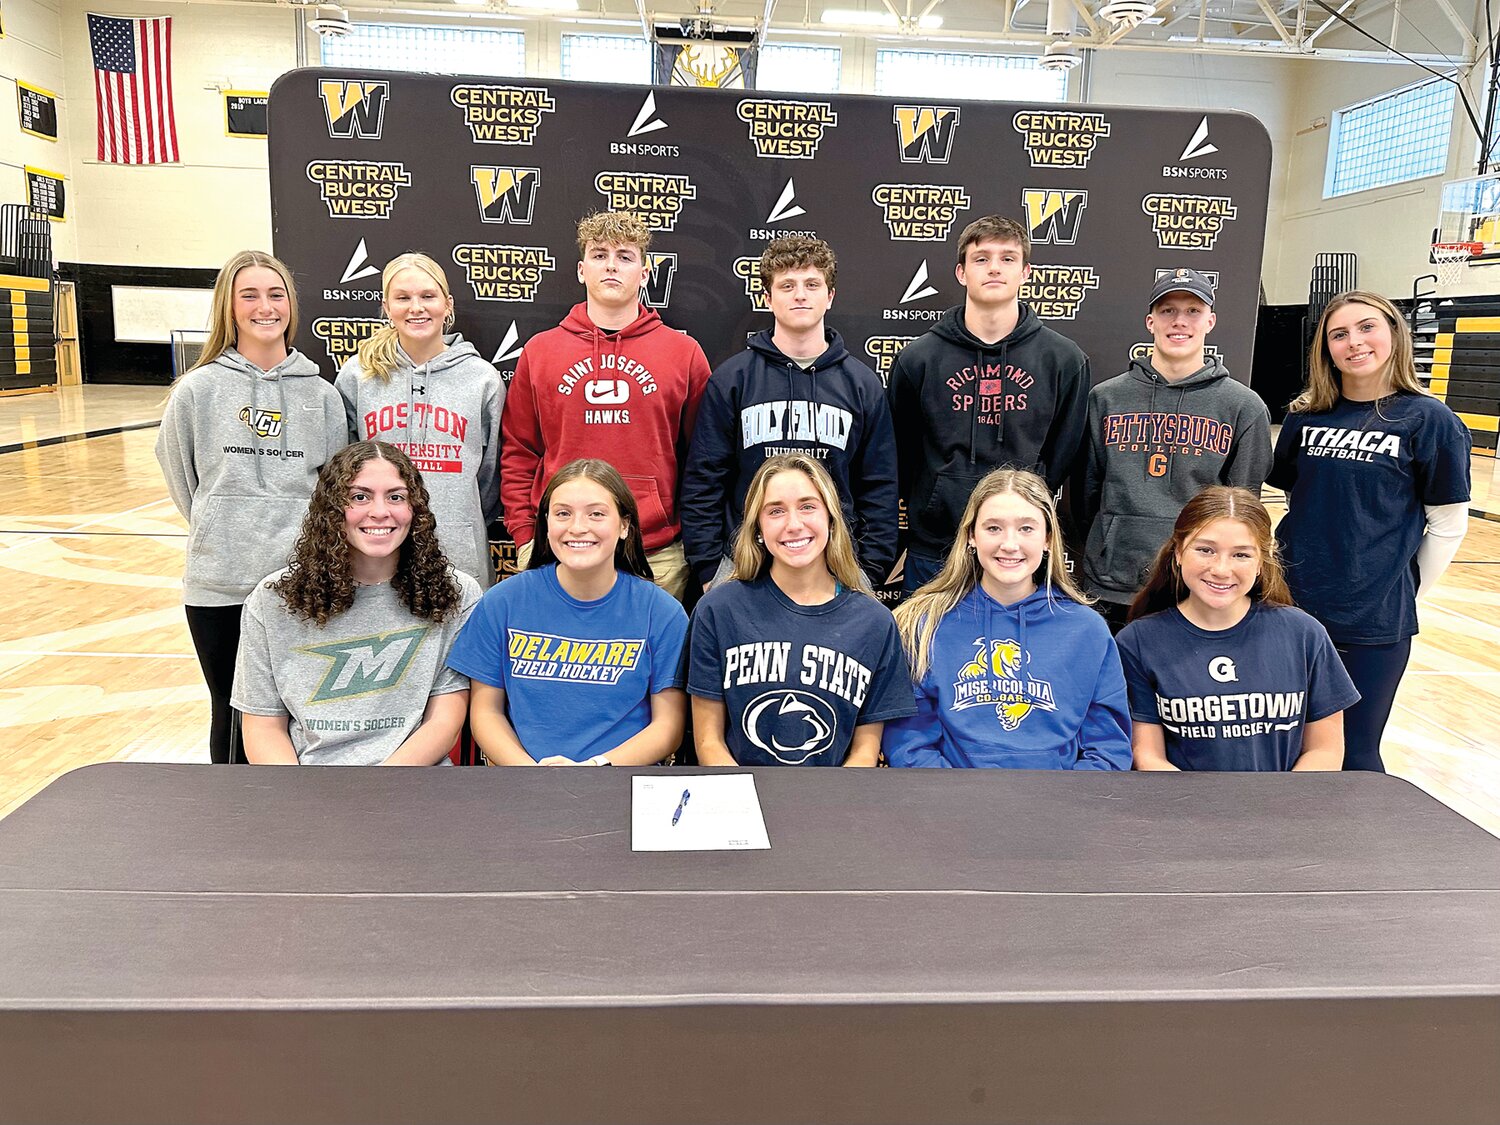 At CB West’s college commitment recognition ceremony are seniors, from left, front row, Alexis Castro, Lily Cosner, Mimi Duffy, Sienna Lawson, Nina Mayro; back row, Kate Weyer, Chloe Dryden, Sam Greer, Jimmy Donnelly, Matt Jacobsen, Connor Mangan and Molly Gibson.